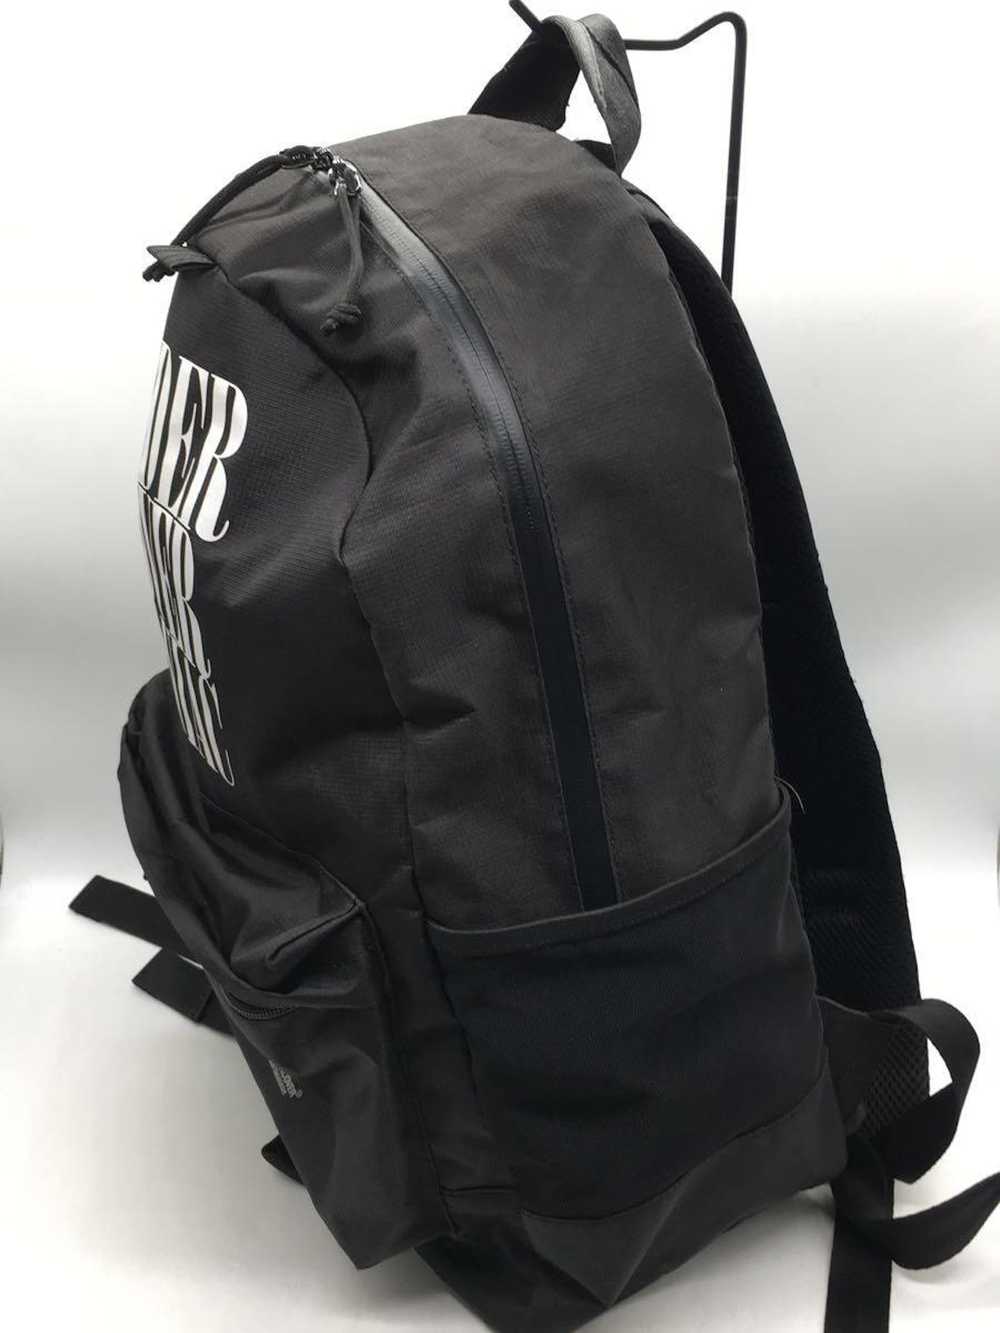 Undercover Undercover Maniac Nylon Backpack - image 2